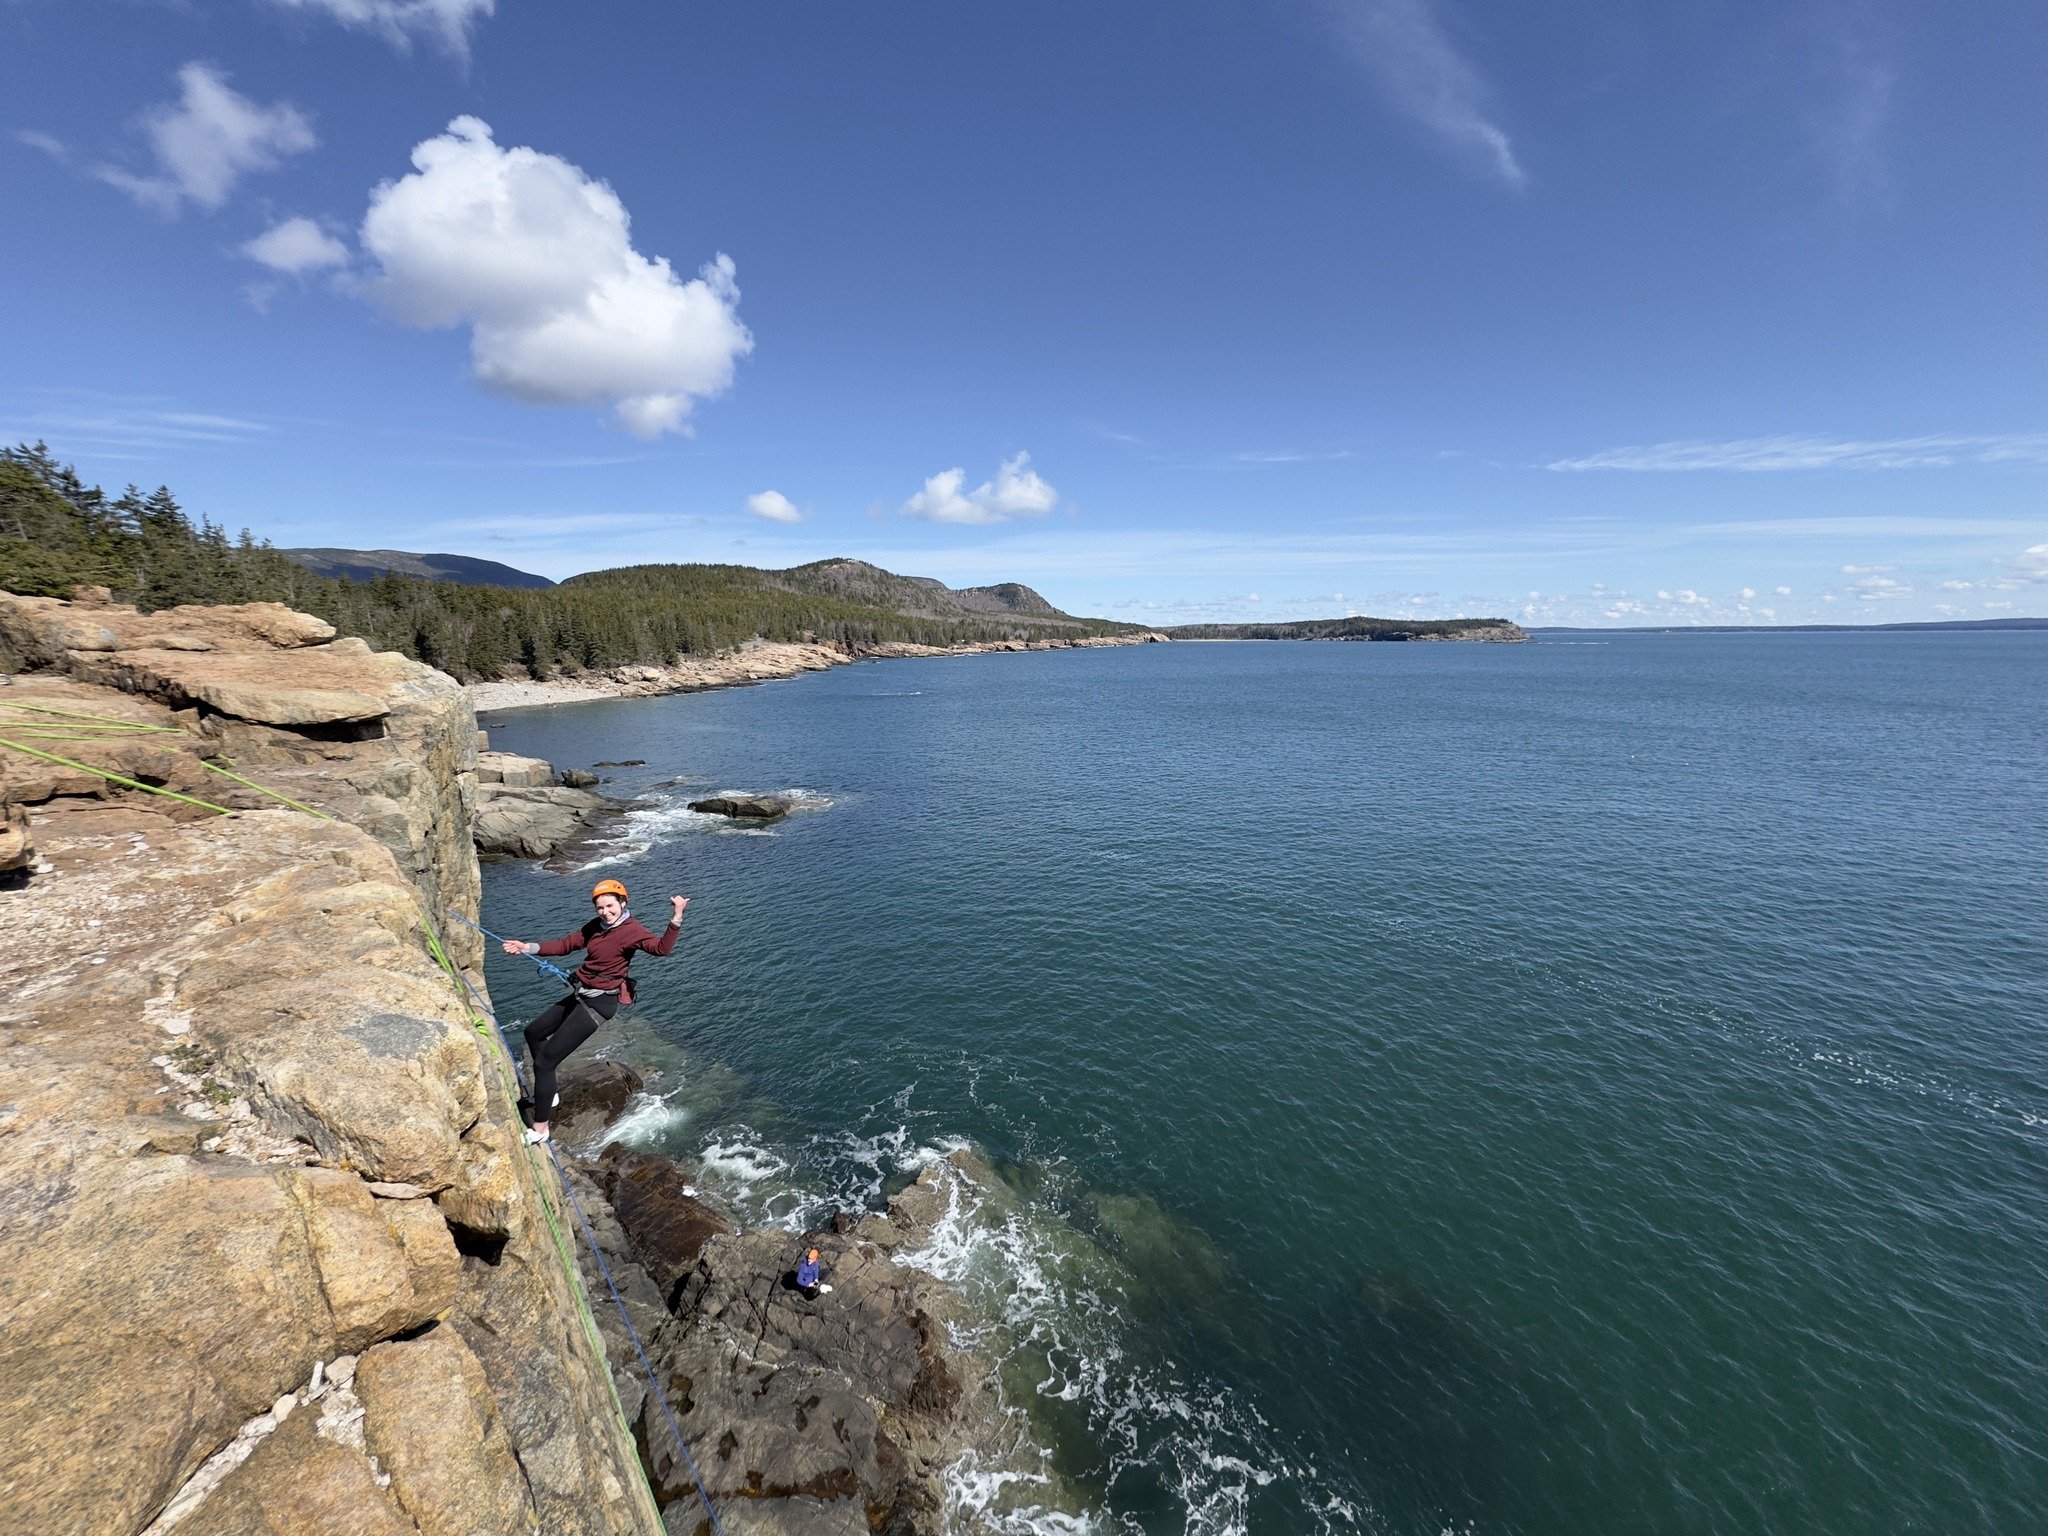 🌟 Calling all adventurers! 🌟

Are you ready to take your climbing skills to new heights? Join us for an unforgettable rock climbing experience in the breathtaking Acadia National Park! 🏞️

At Equinox Guiding Services, we're thrilled to offer guide